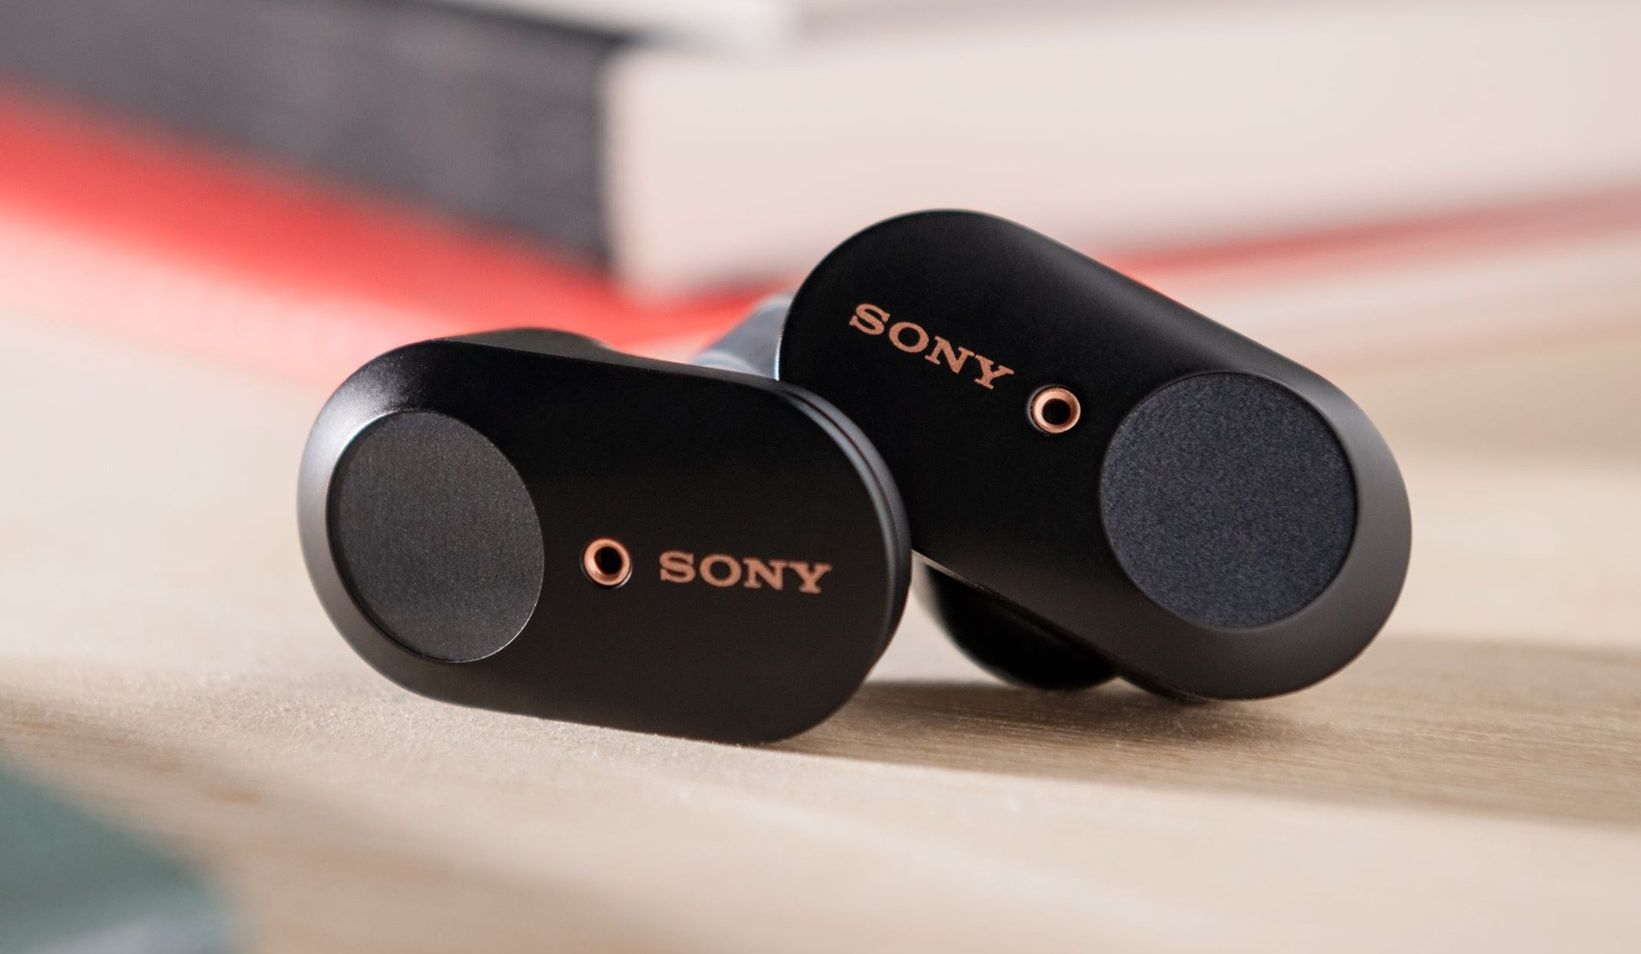 Sony WF 1000XM3 Wireless Earbuds Picture, Photo, Wallpaper